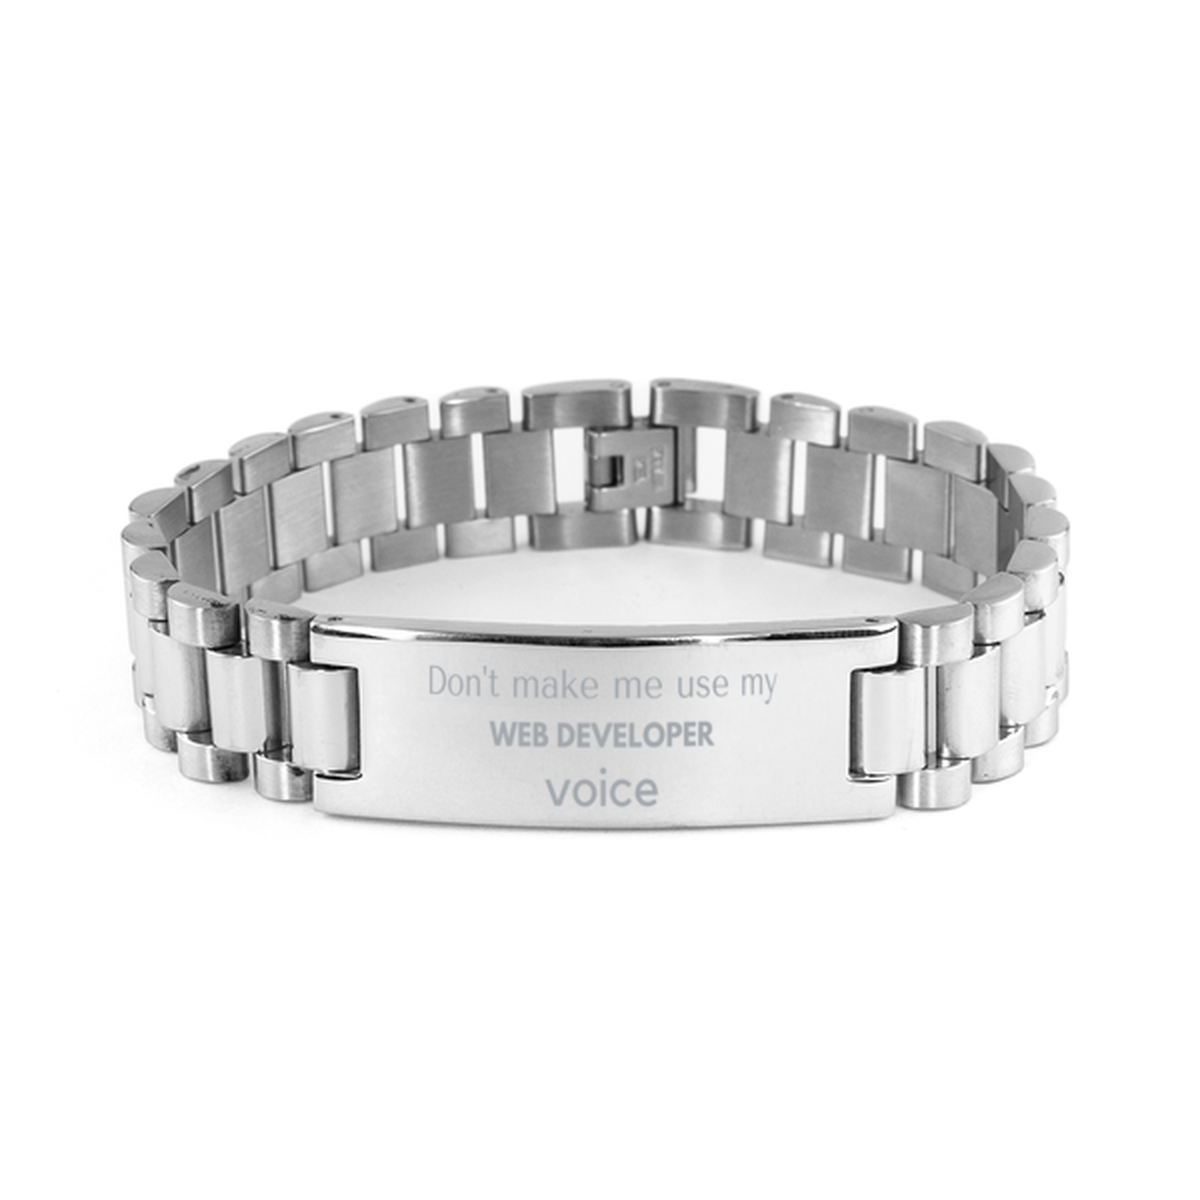 Don't make me use my Web Developer voice, Sarcasm Web Developer Gifts, Christmas Web Developer Ladder Stainless Steel Bracelet Birthday Unique Gifts For Web Developer Coworkers, Men, Women, Colleague, Friends